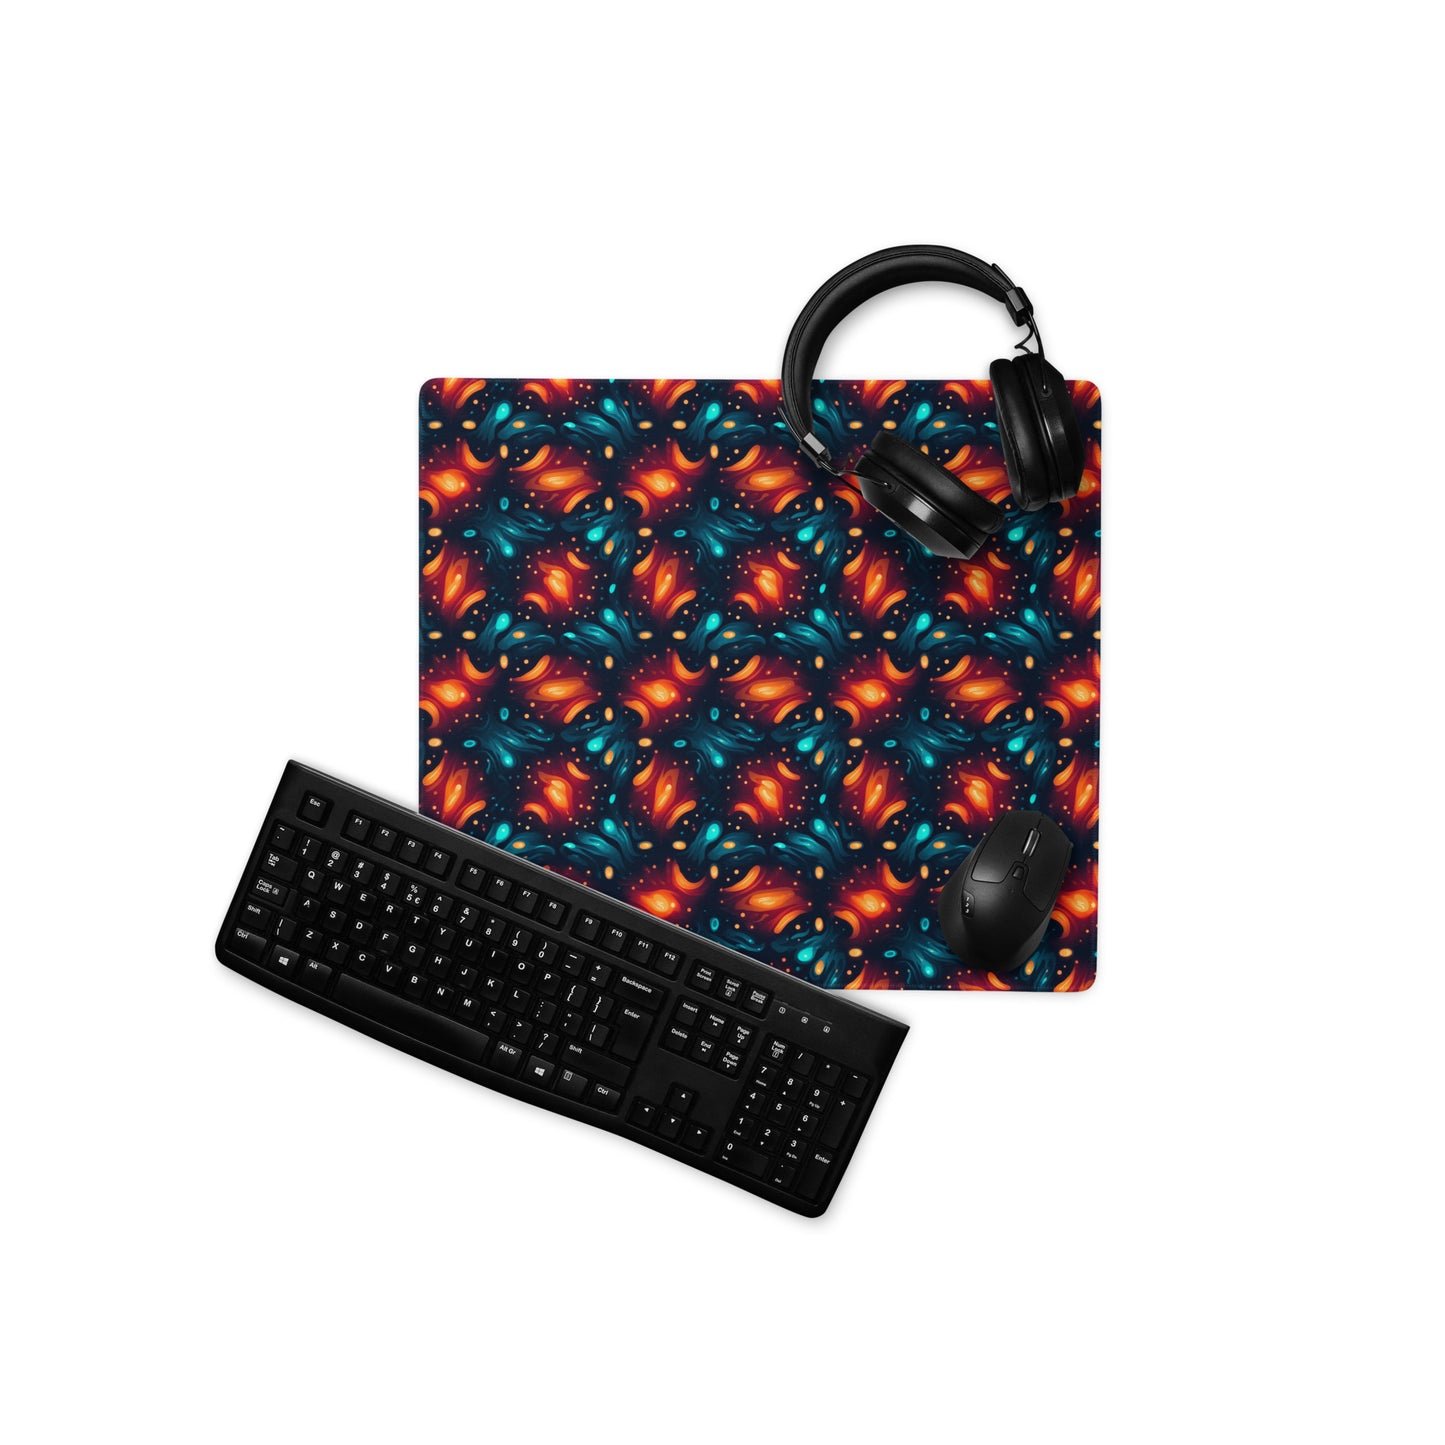 A 18" x 16" desk pad with a blue and orange abstract cross hatch pattern. With a keyboard, mouse, and headphones sitting on it.